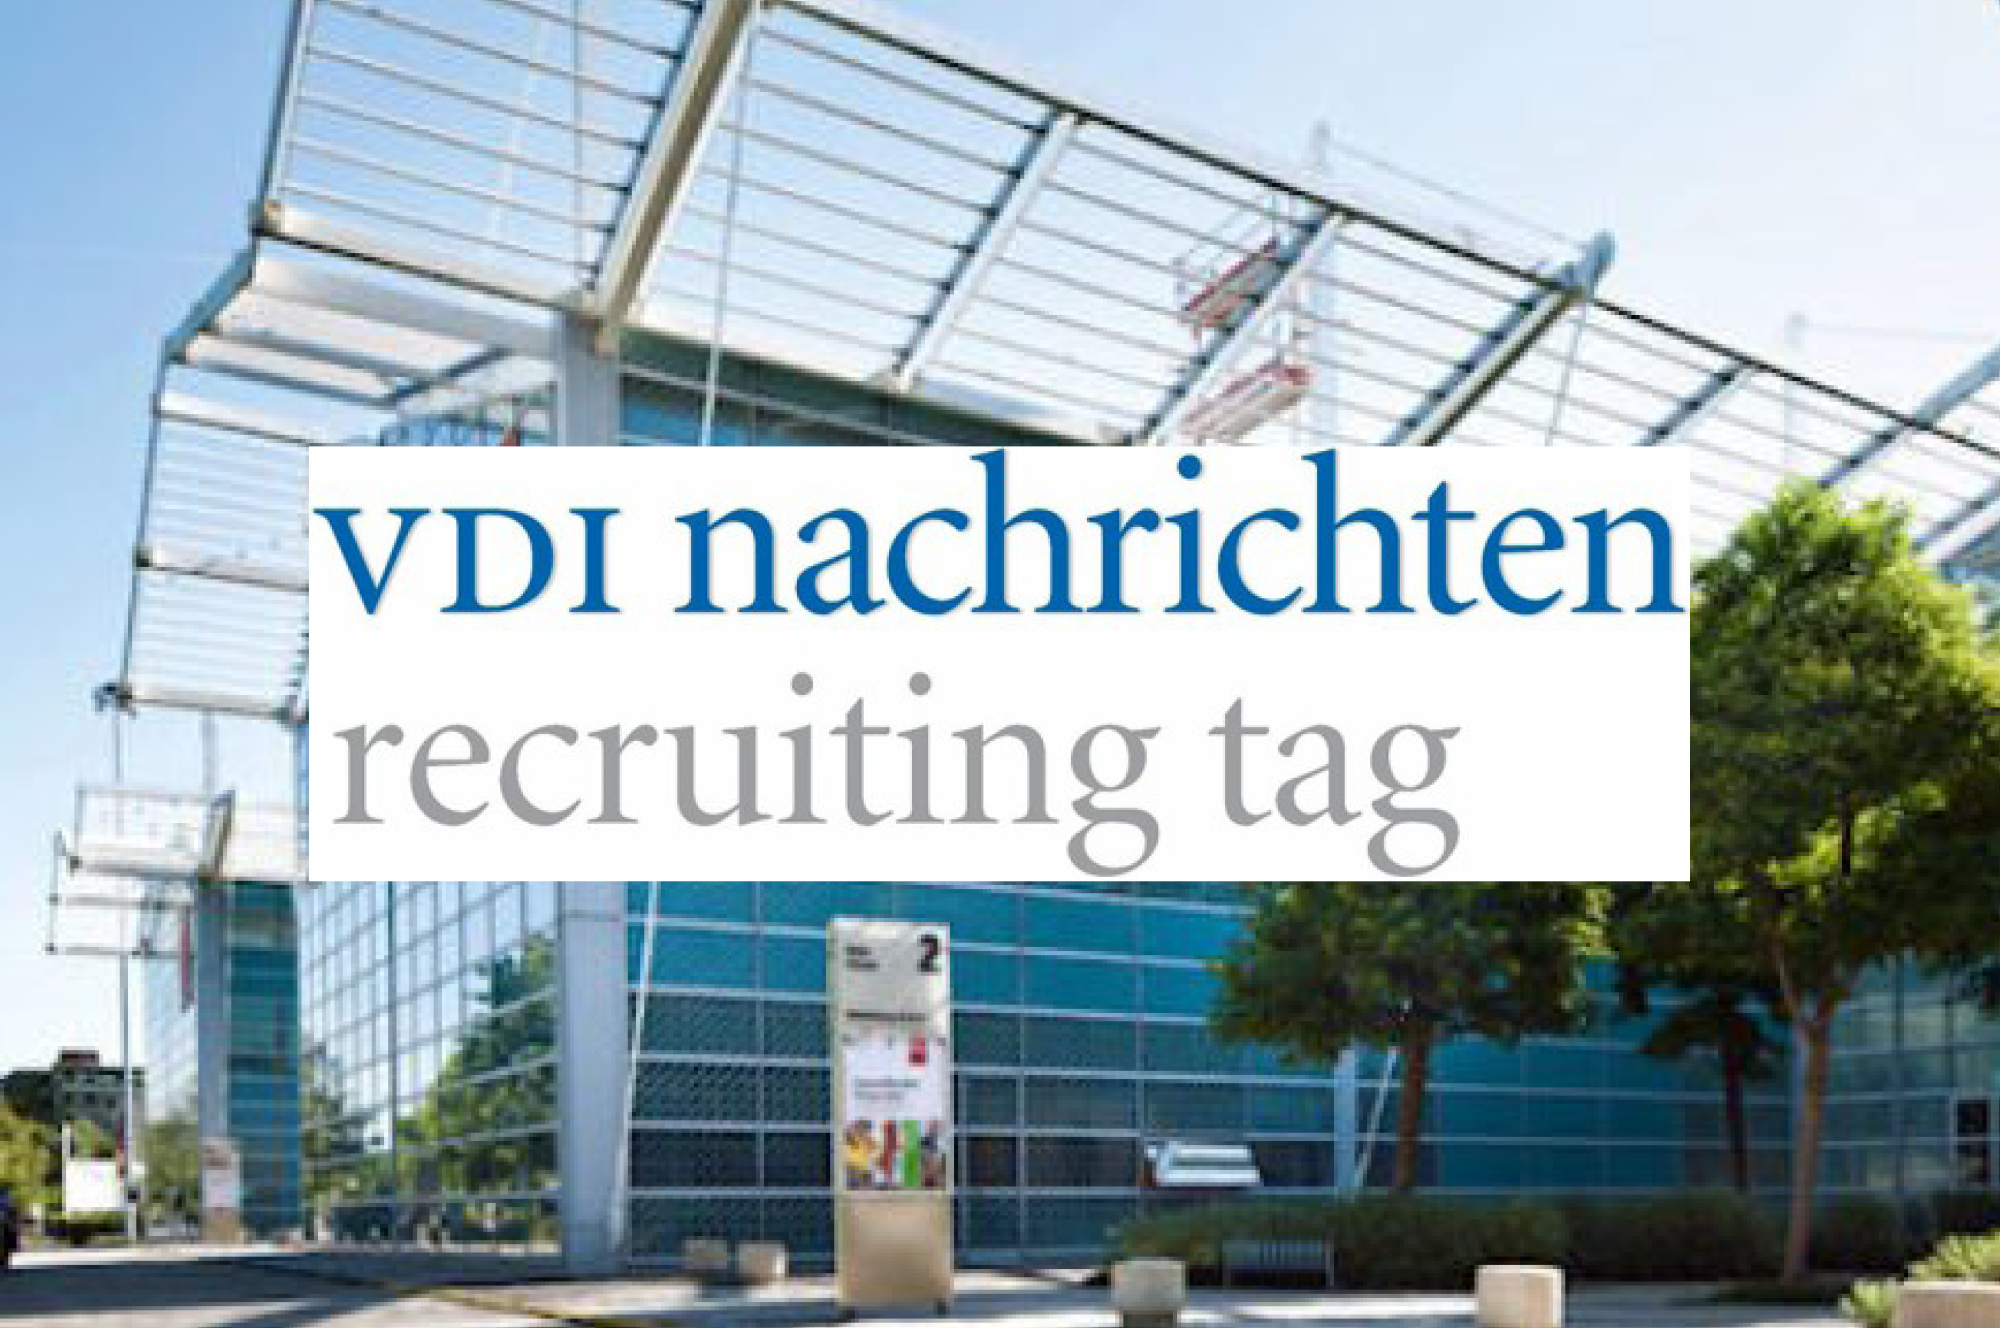 vdi recruiting tag muenchen 2021